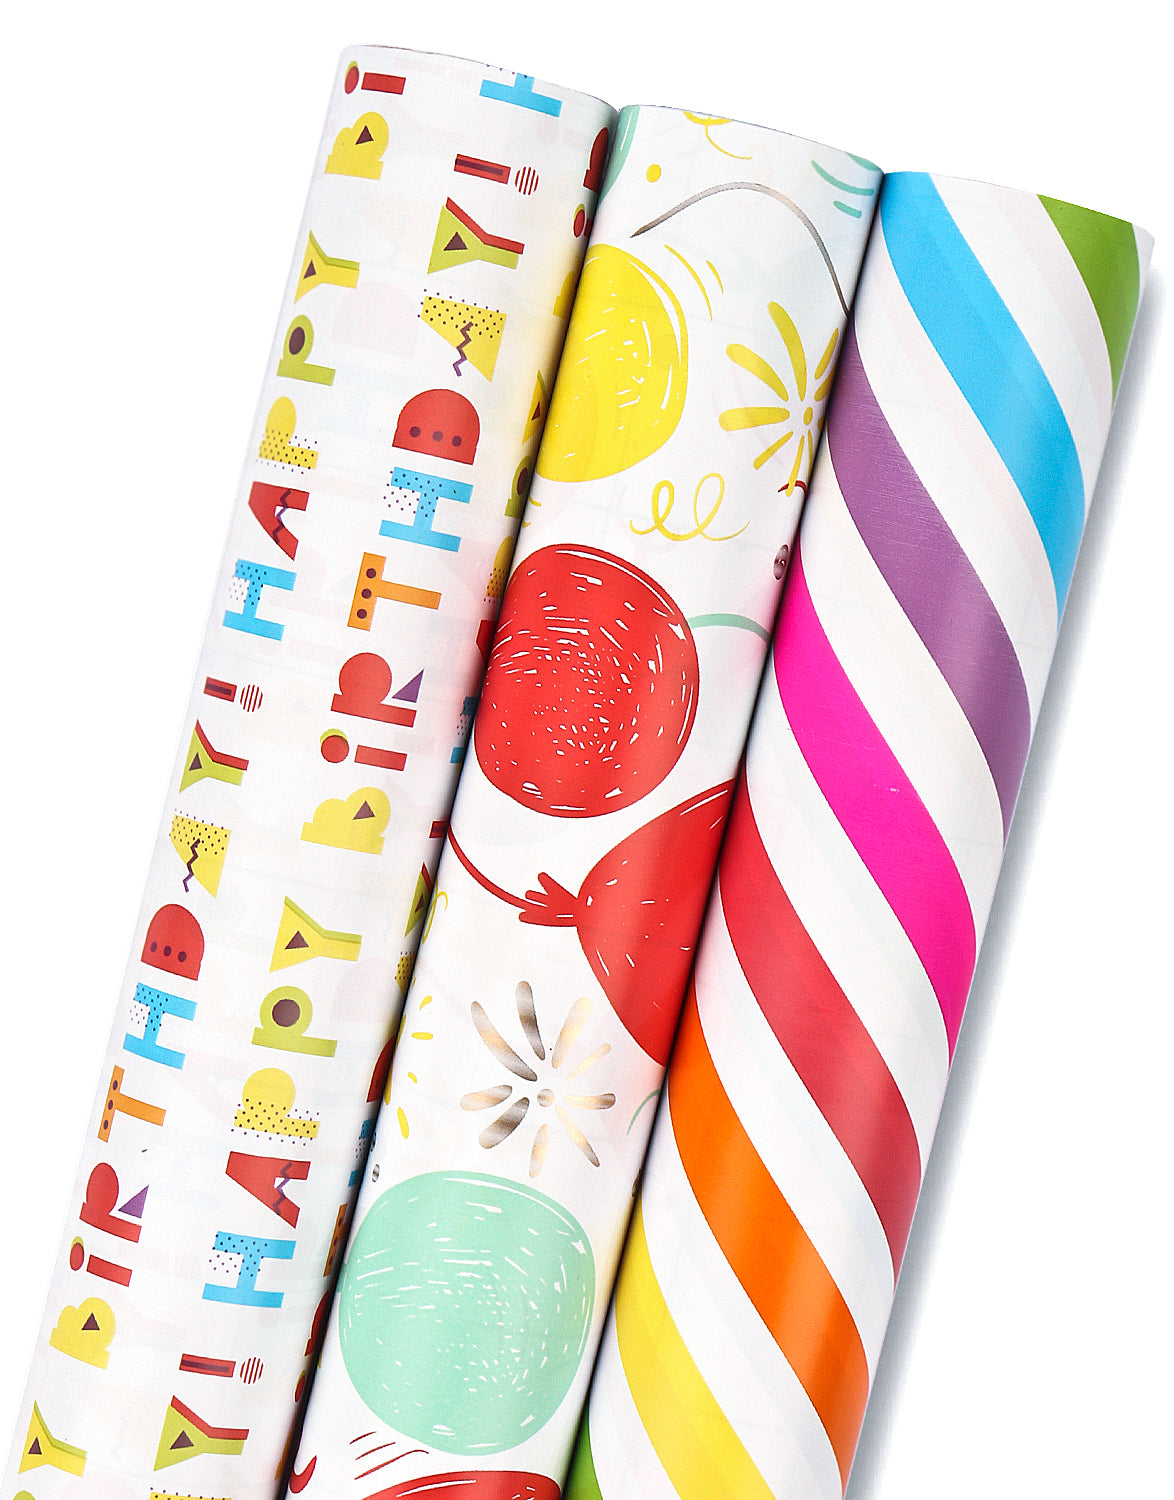 MAYPLUSS Gift Wrapping Paper Roll - 3 Different Birthday Print Design (14.4  sq. ft.ttl.) - 17 inch X 120 inch Per roll